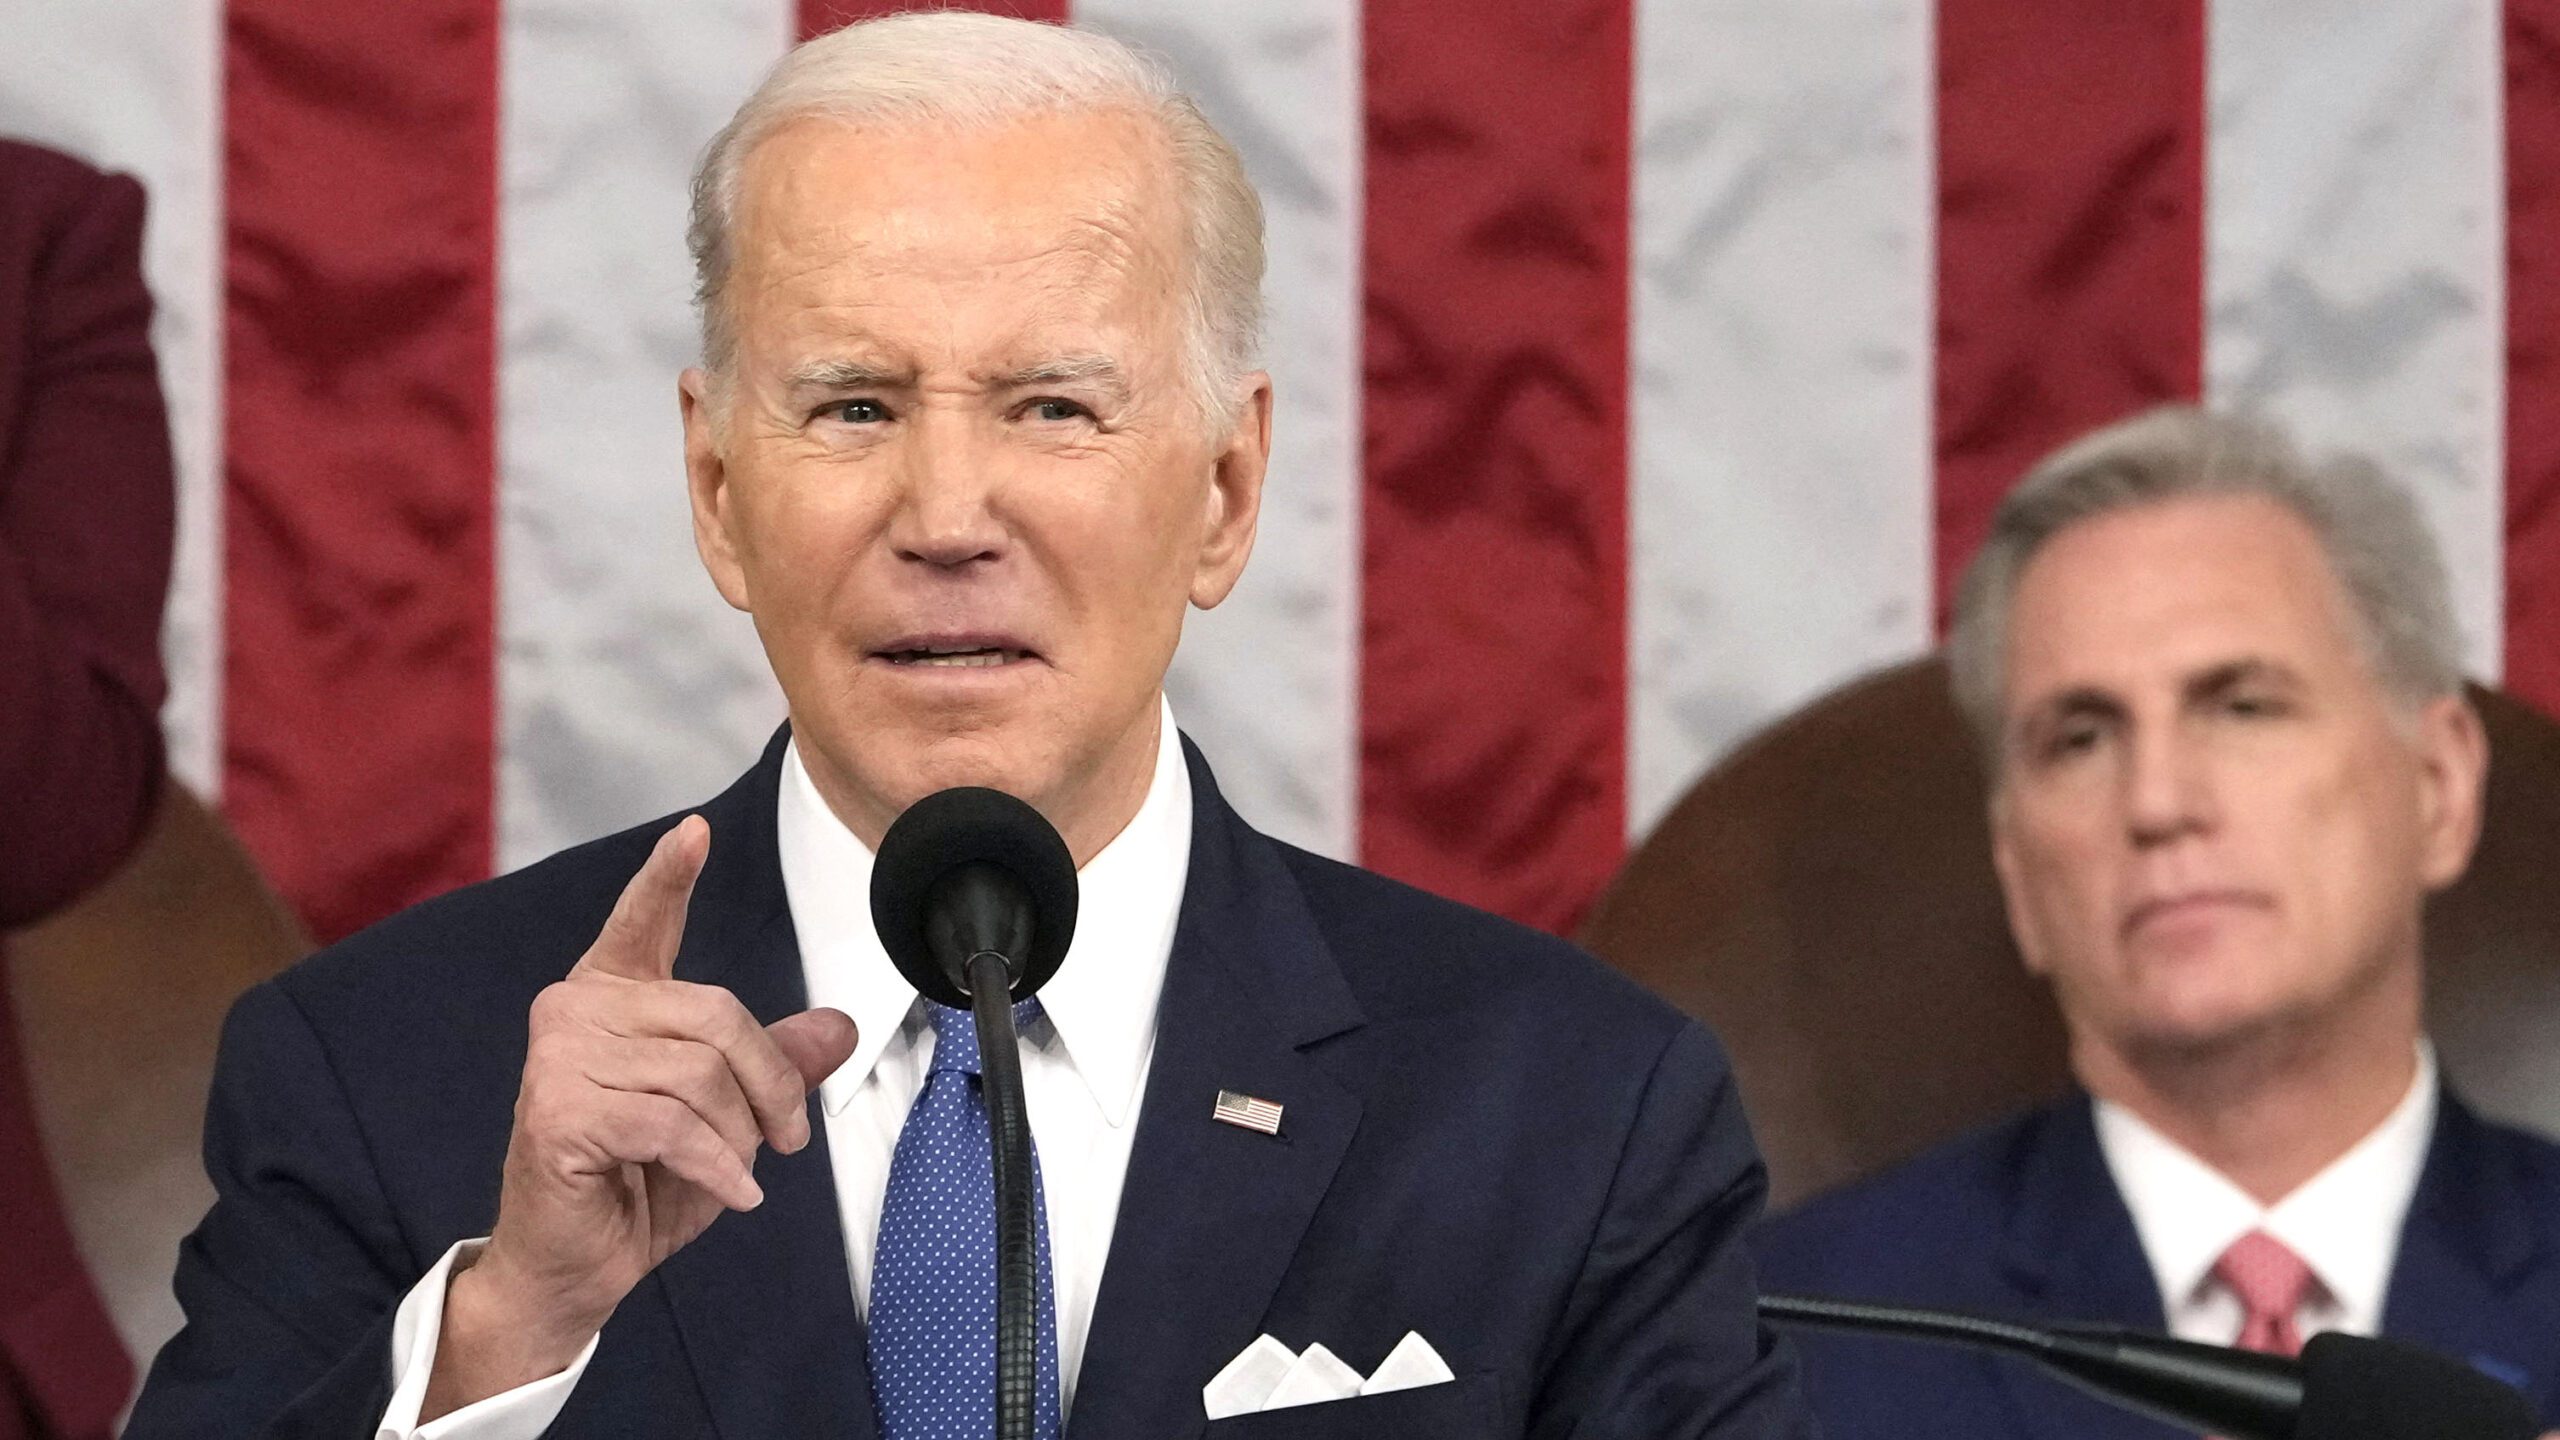 congress-laughs-and-boos-biden-over-claims-about-oil-and-gas-industry